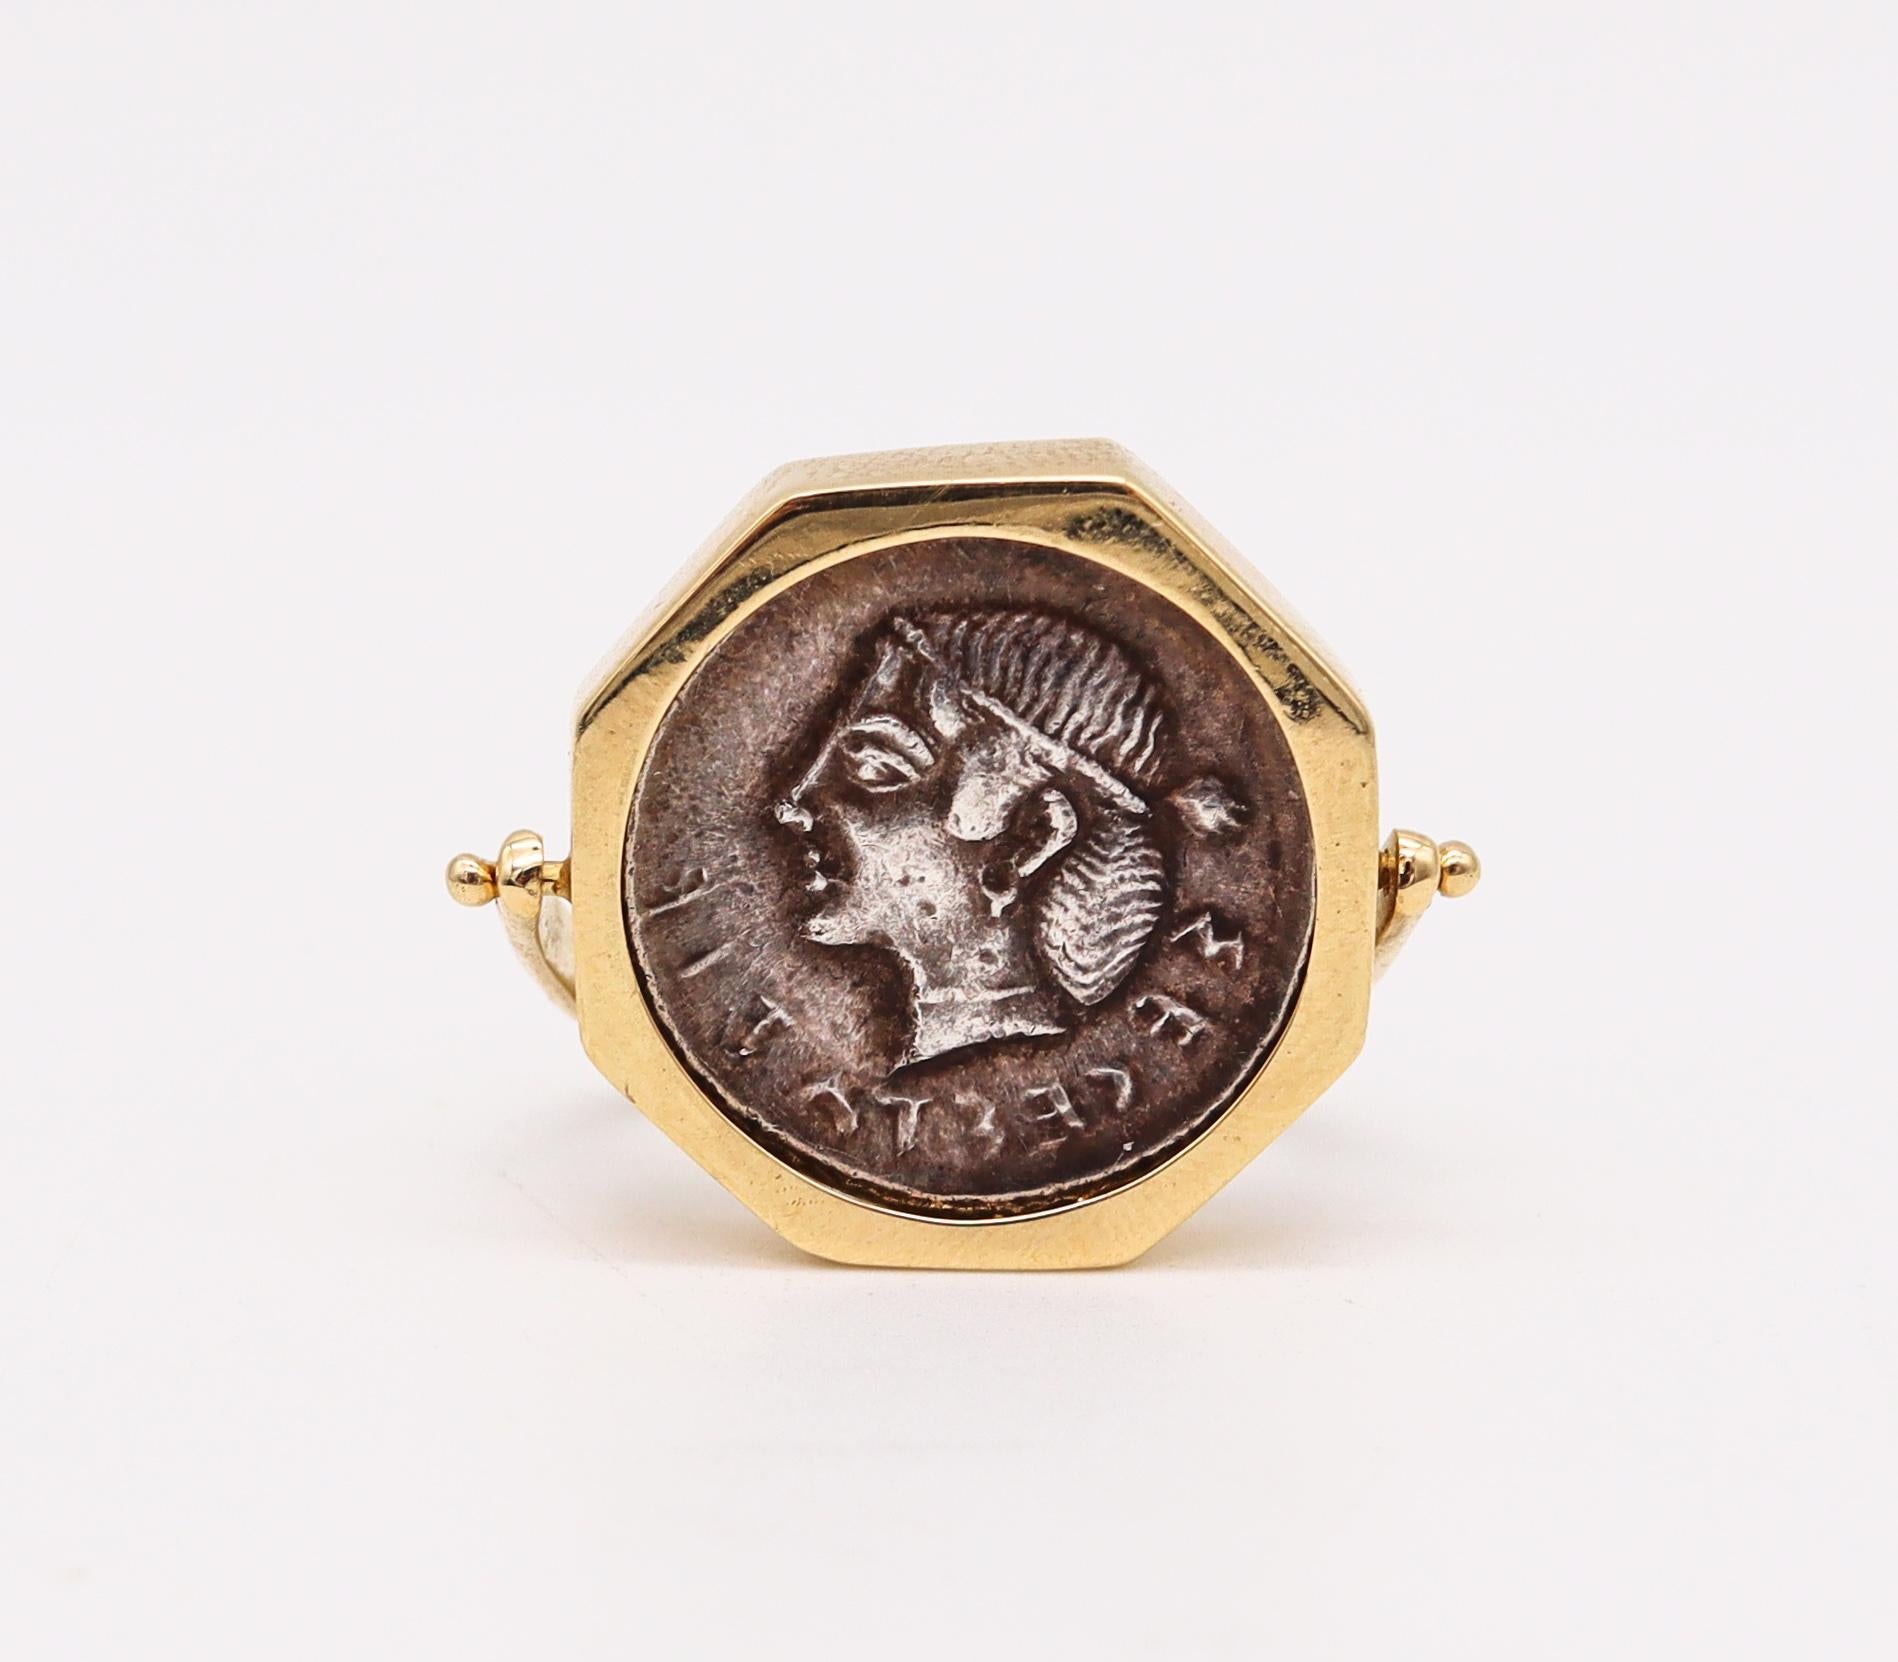 Signet flip ring with an ancient coin from Segesta city.

Fabulous coin signet ring, crafted with ancient flip technique in solid yellow gold of 18 karats with high polished finish. It is mounted with a very rare, genuine and authentic ancient Greek